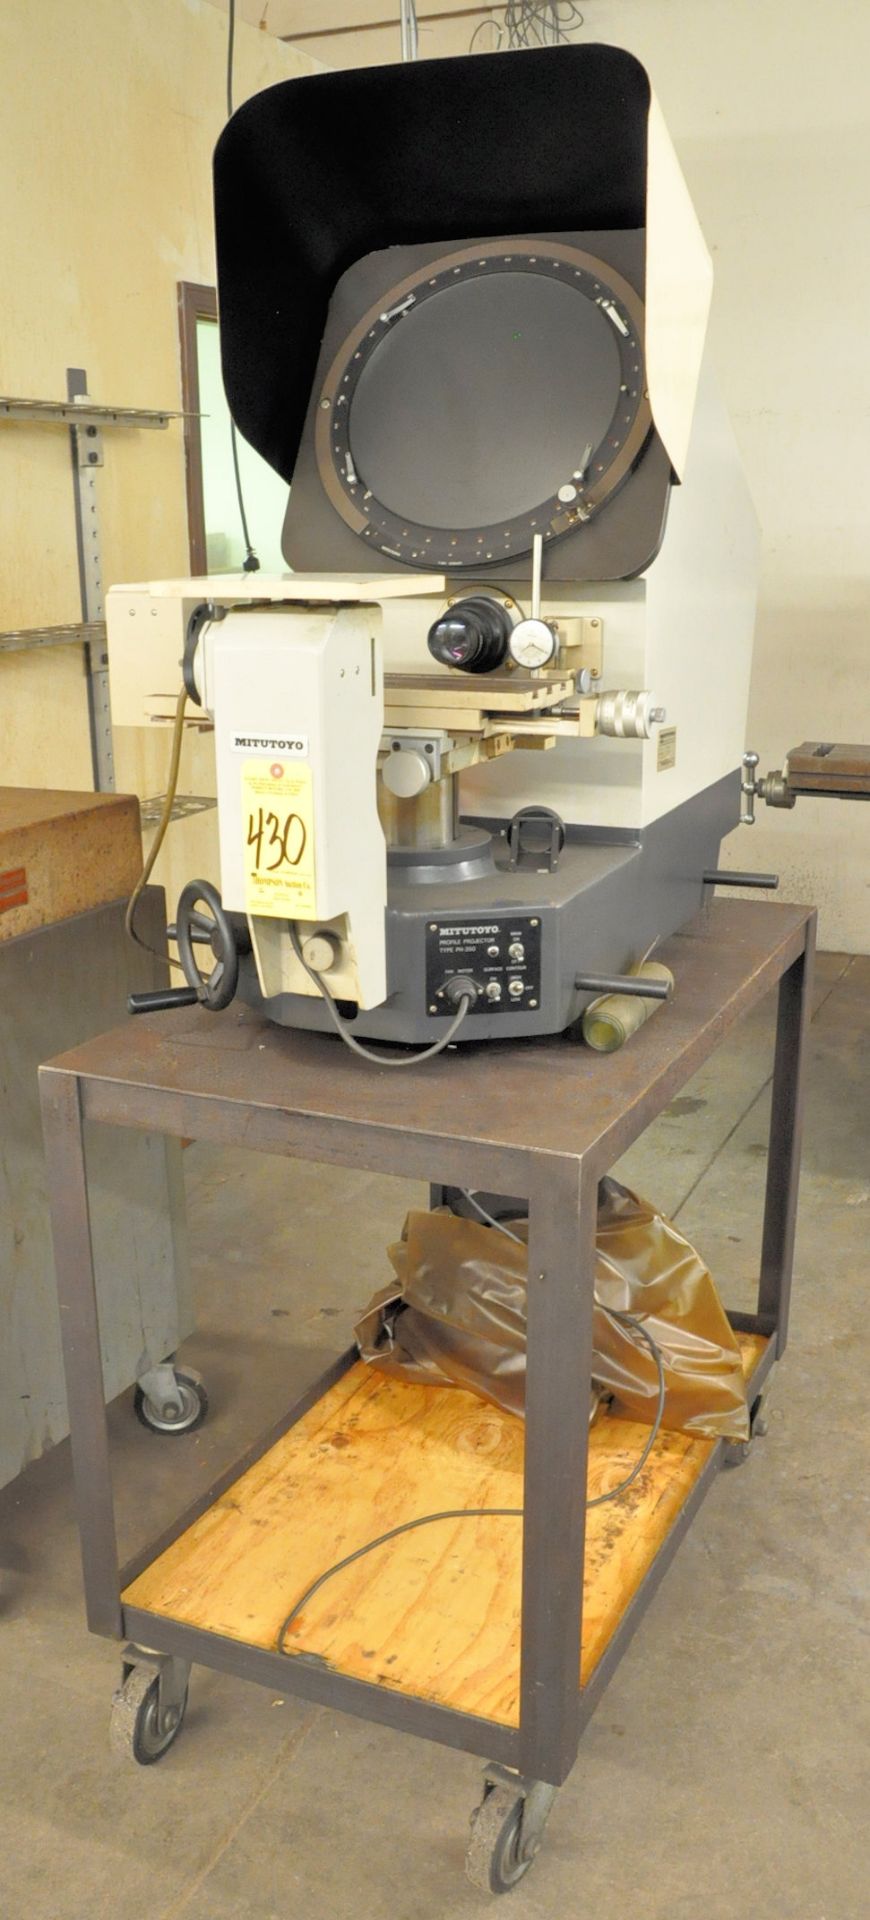 Mitutoyo Type PH-350, 14" Optical Comparator, S/n 10444, with Cart